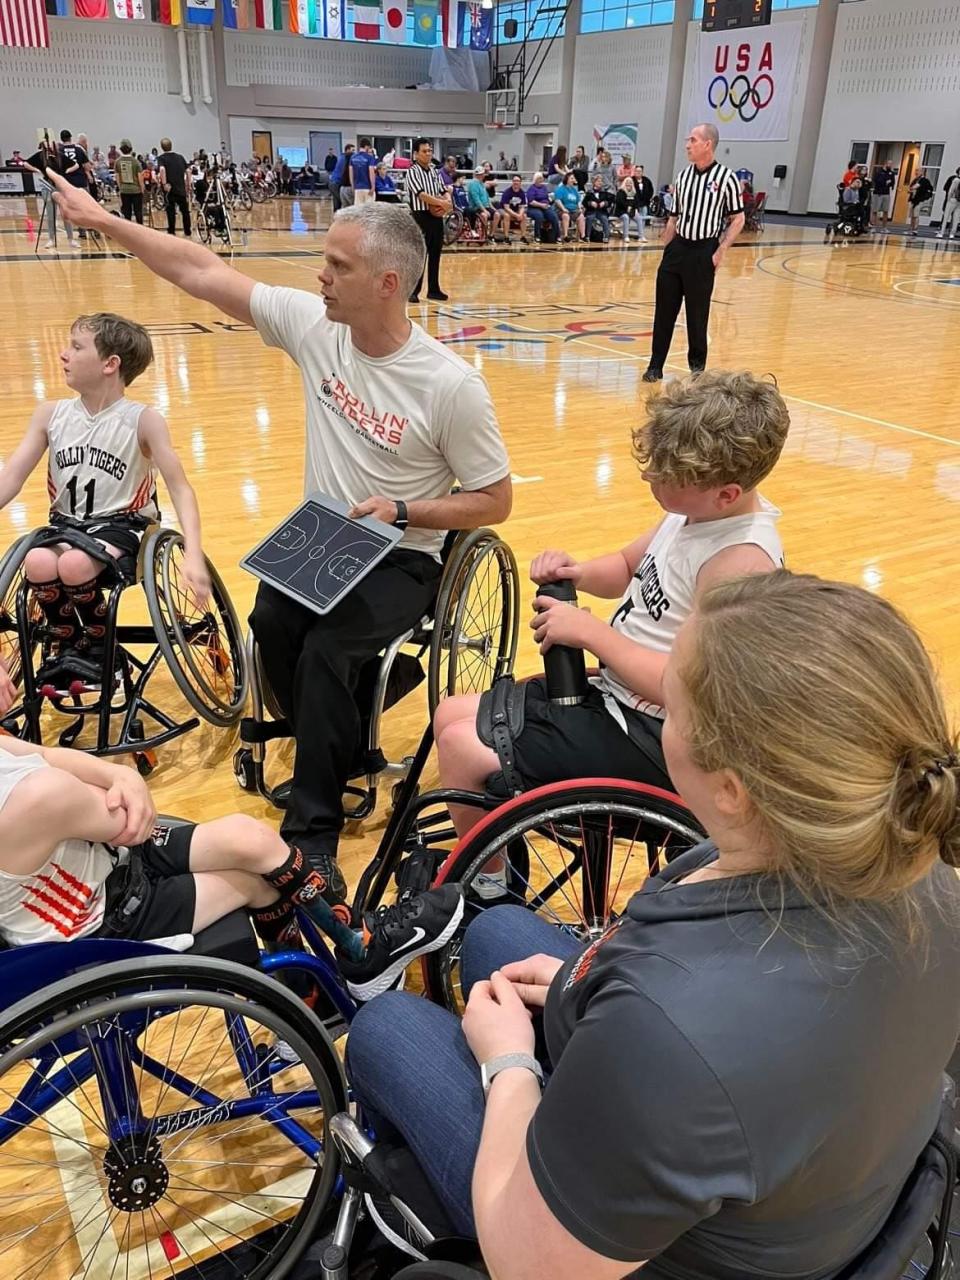 Coaches Lindsey Metz and Jeff Townsend talk to their Roger C. Peace Rollin' Tigers Junior wheelchair basketball team diring a game in Birmingham, Ala.